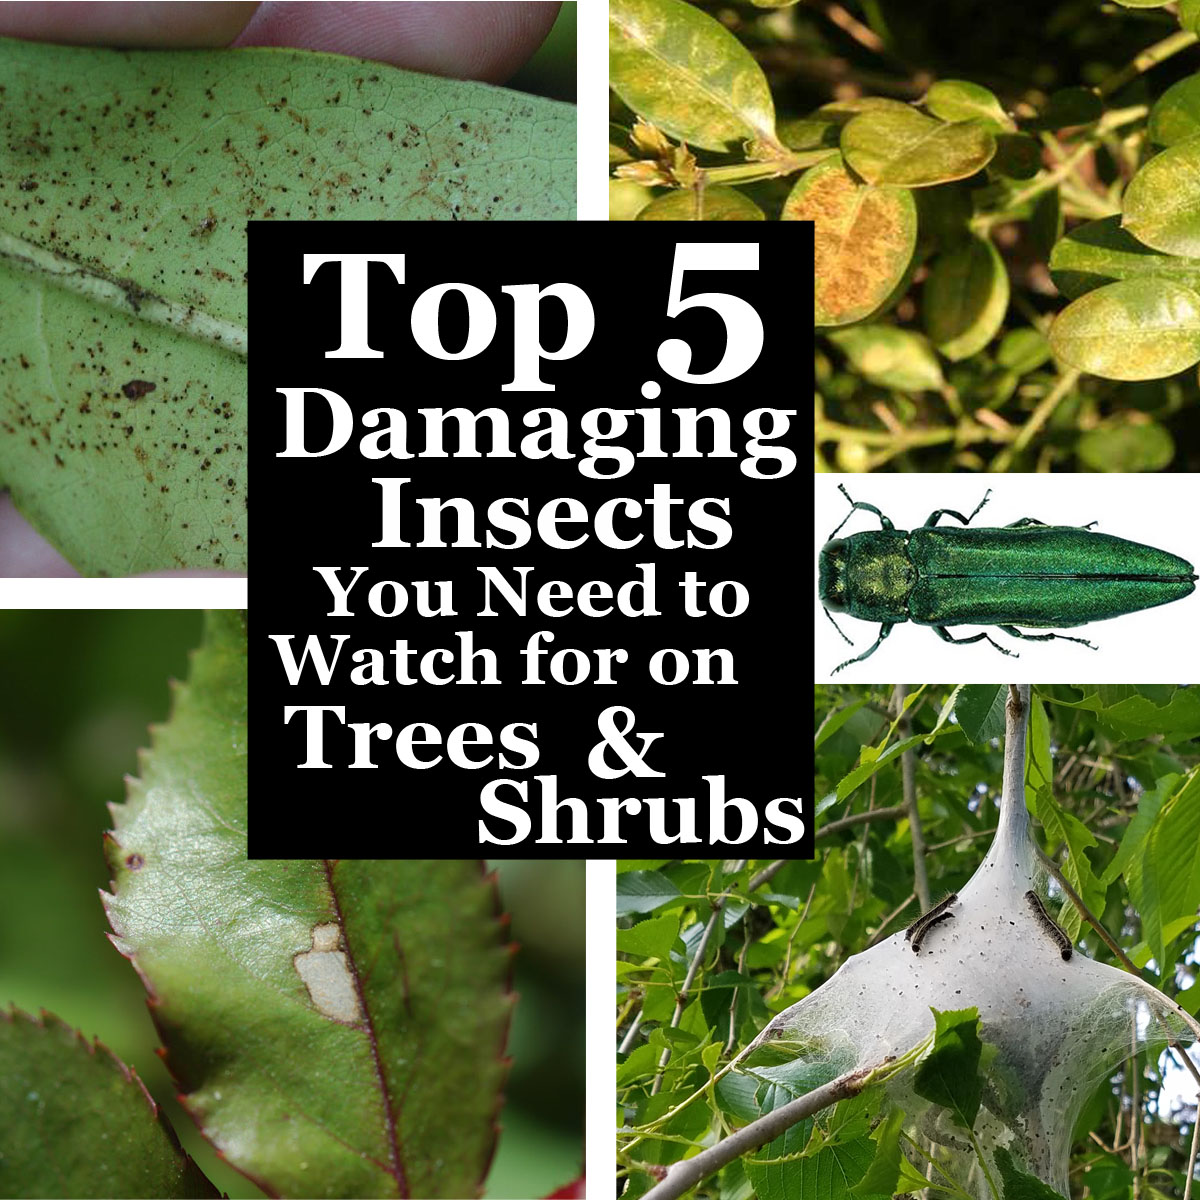 2018-Top-5-Damaging-Insects-You-Need-to-Watch-for-on-trees-and-shrubs-header